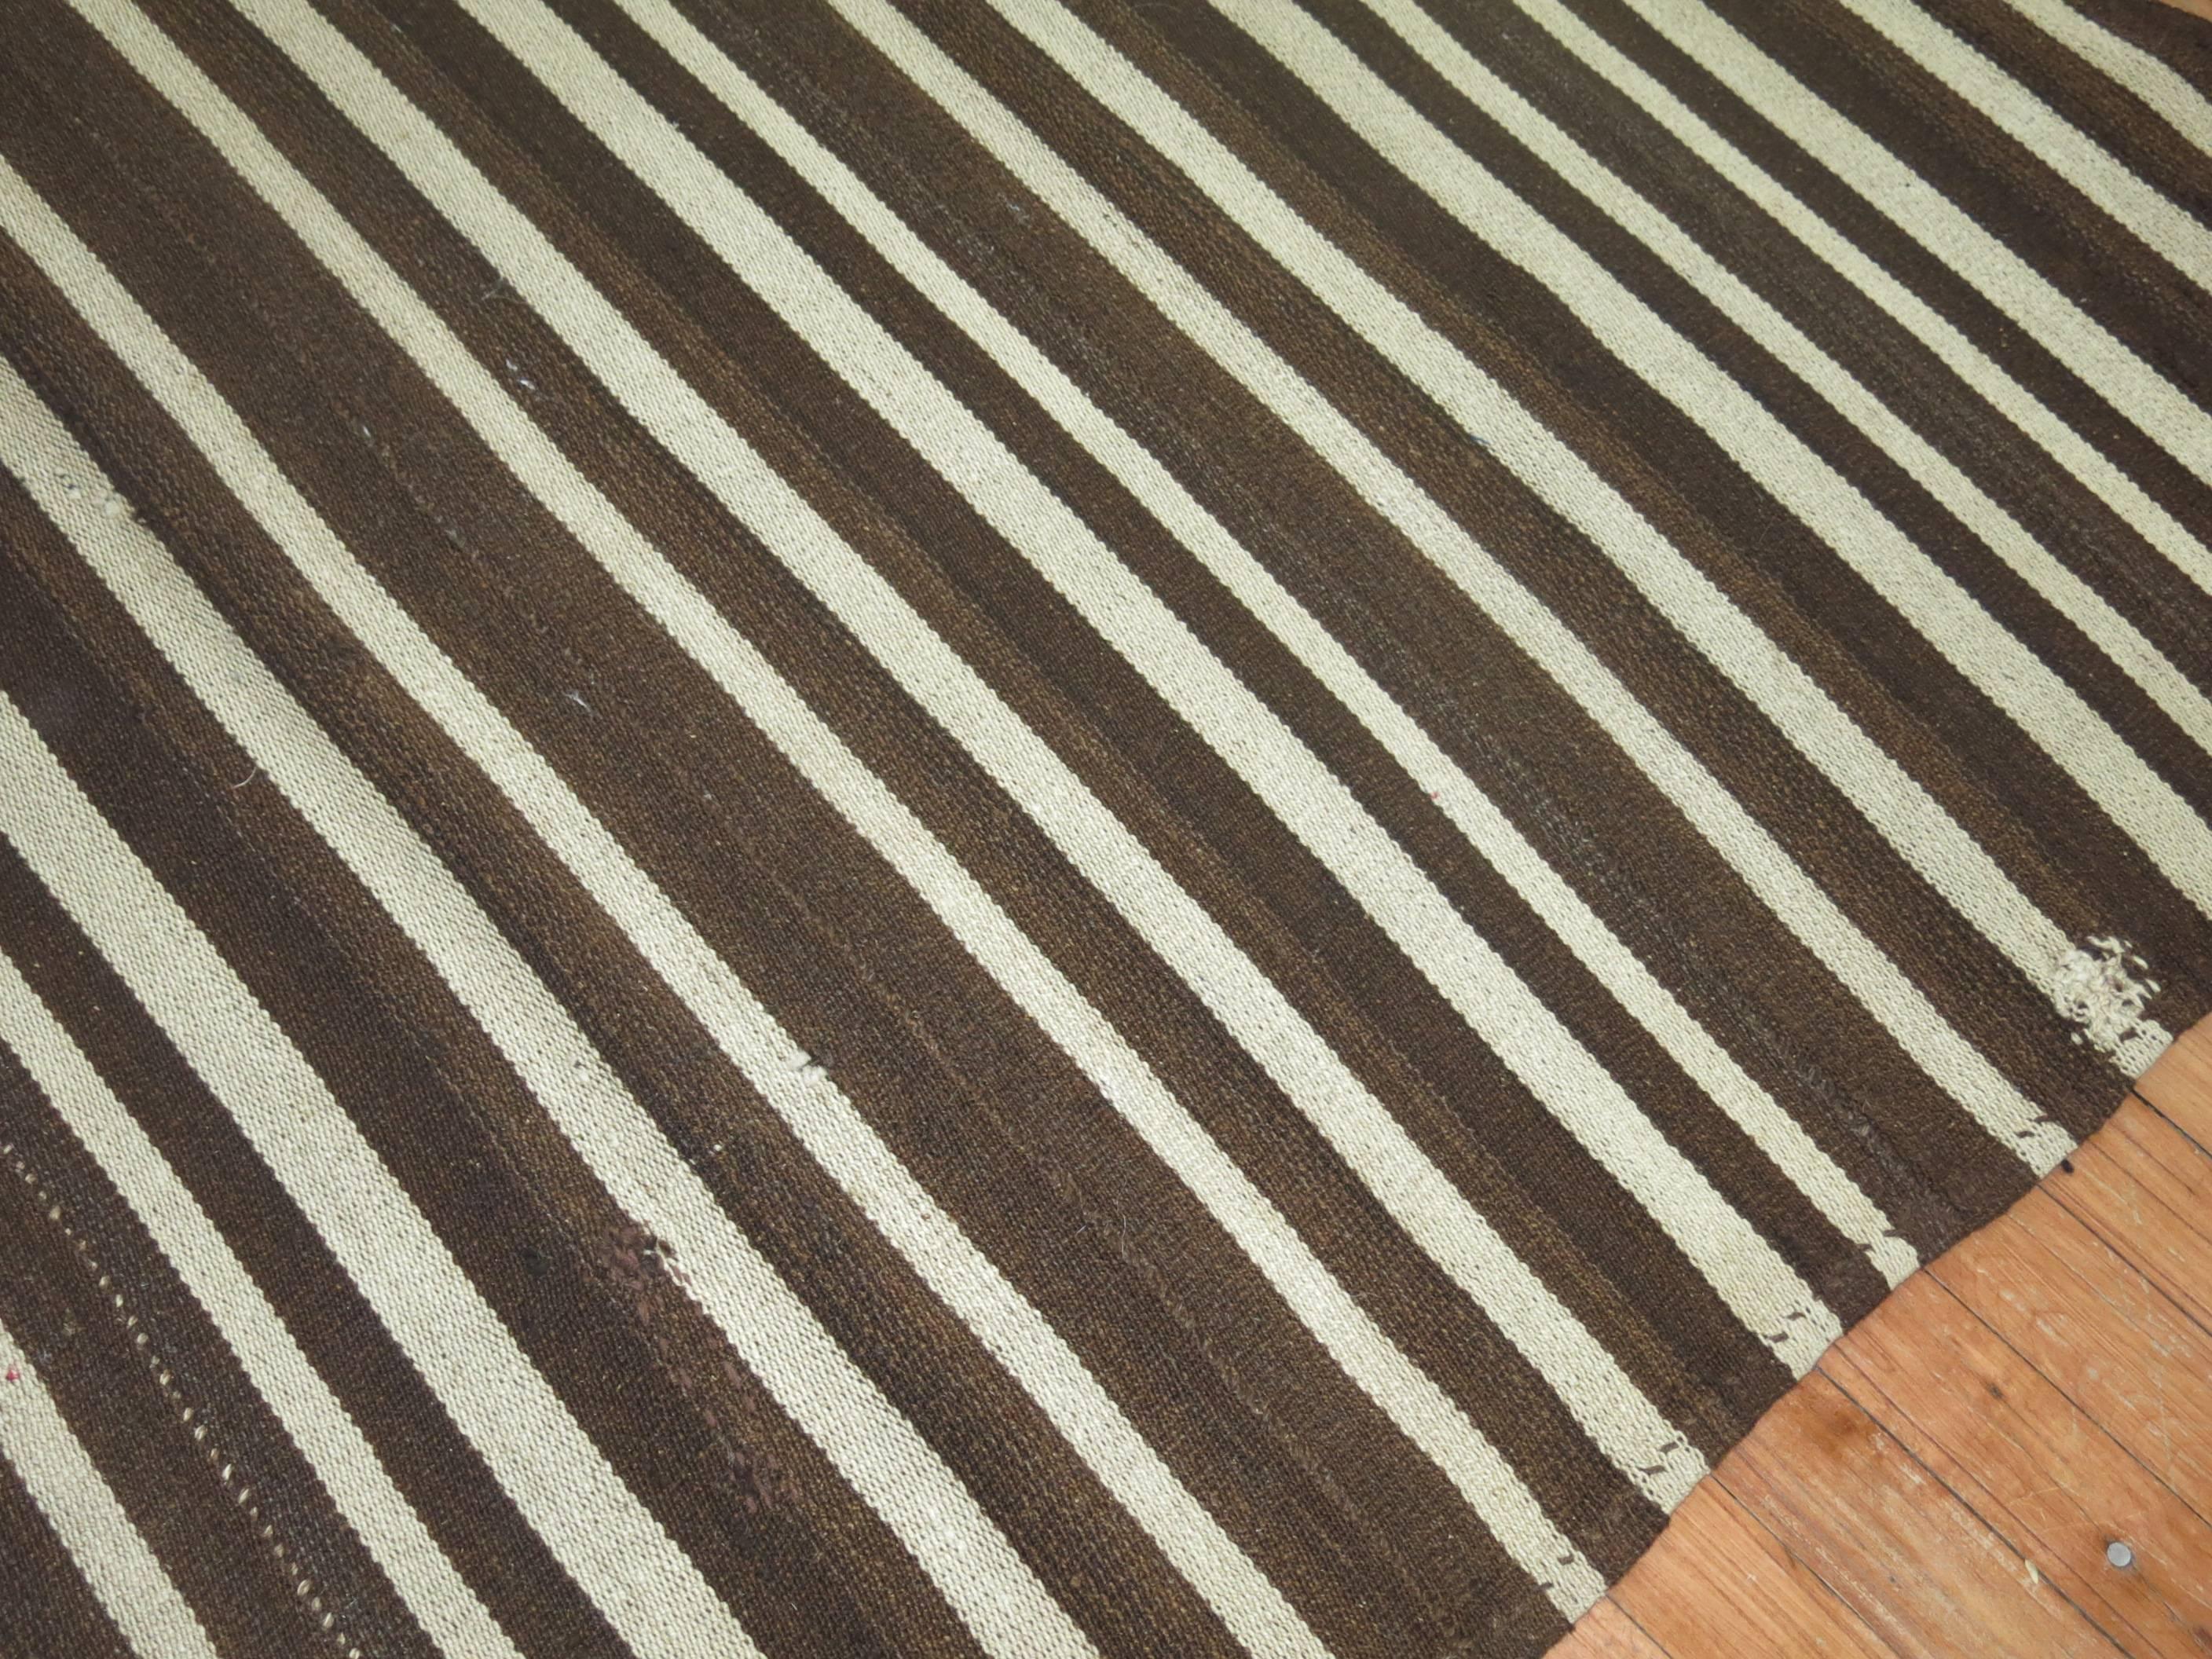 A rugged striped Kilim woven in Turkey. Chocolate brown and creams.

Measures: 6'3